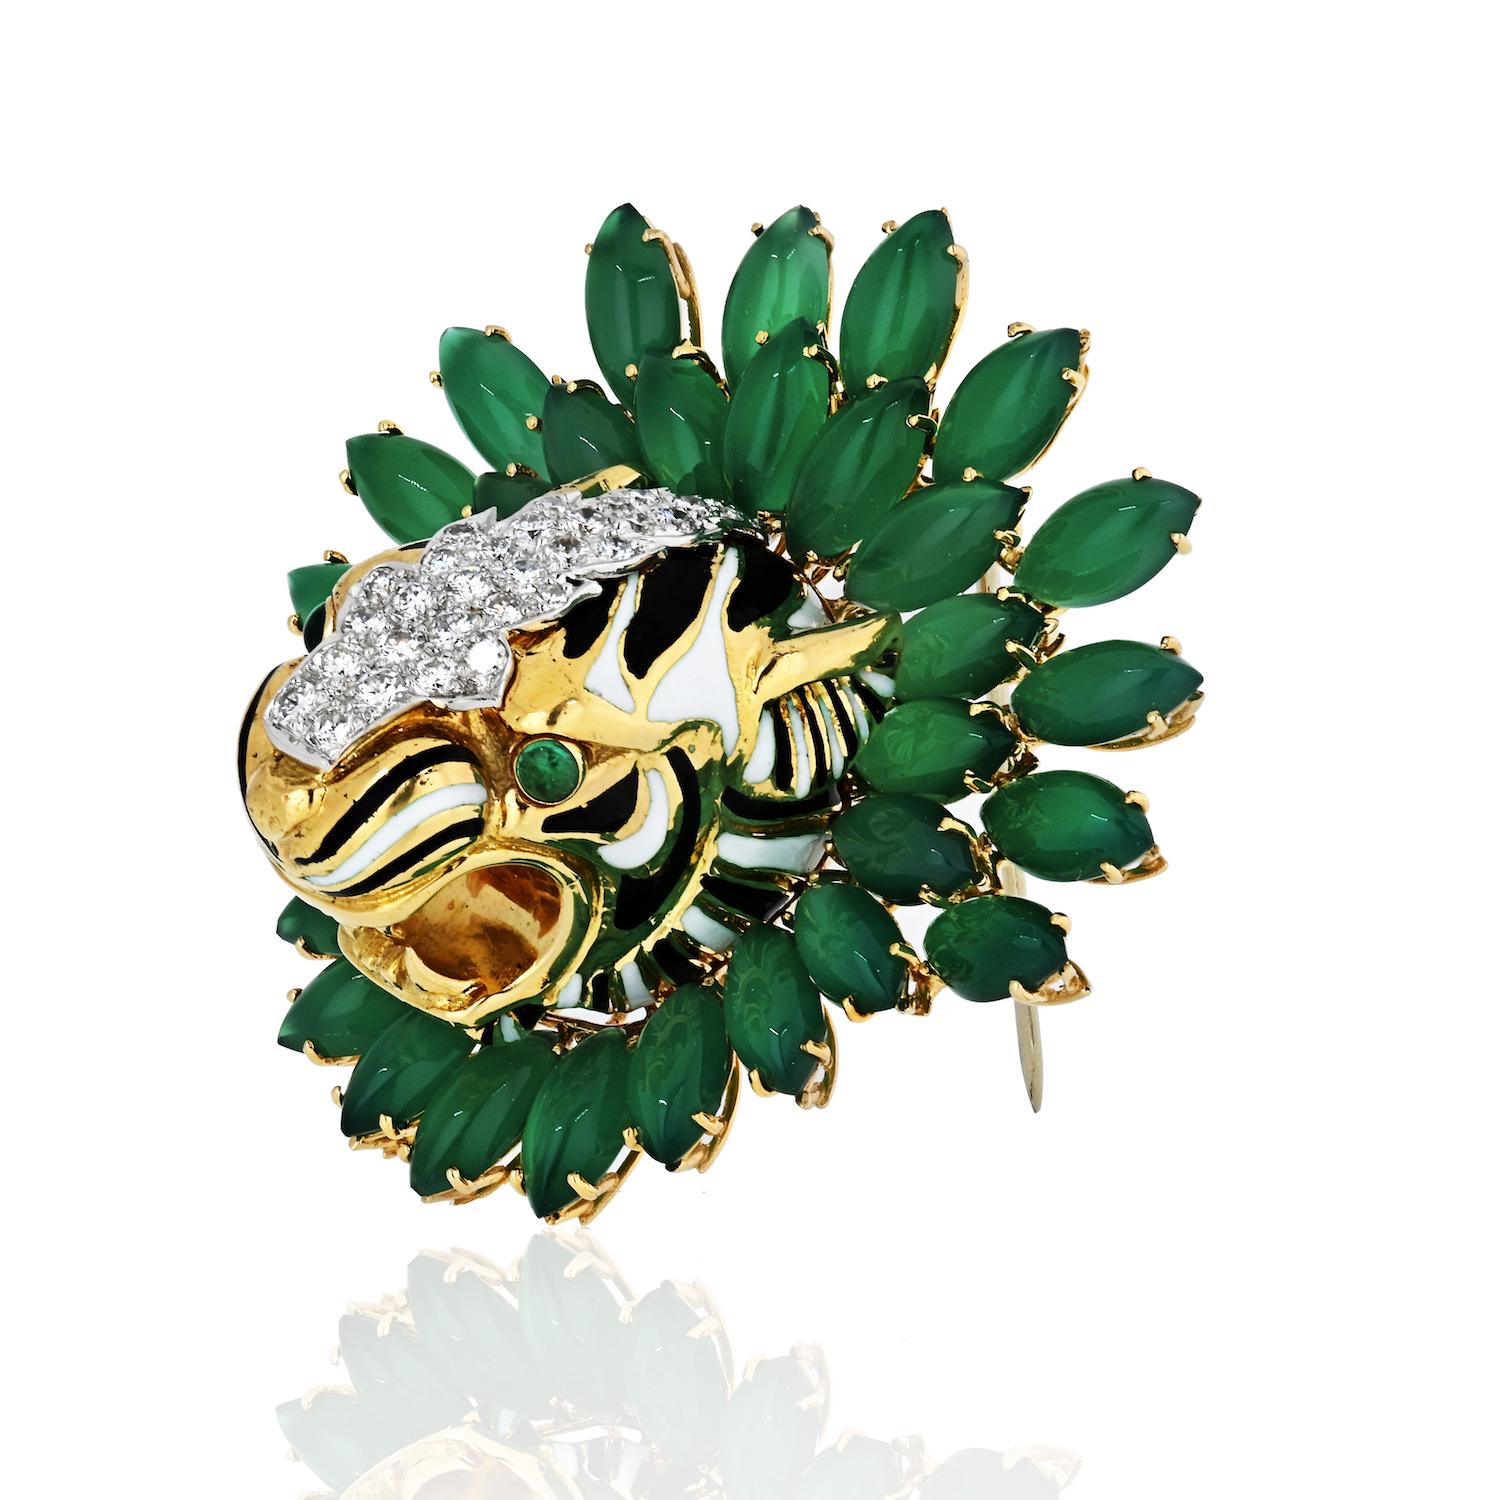 Stunning Tiger Head Brooch created by David Webb featuring marquise green onyx, cabochon emeralds, approximately 0.99 carats of brilliant-cut diamonds, set in 18K yellow gold and platinum.
W: 2inches
Excellent condition.